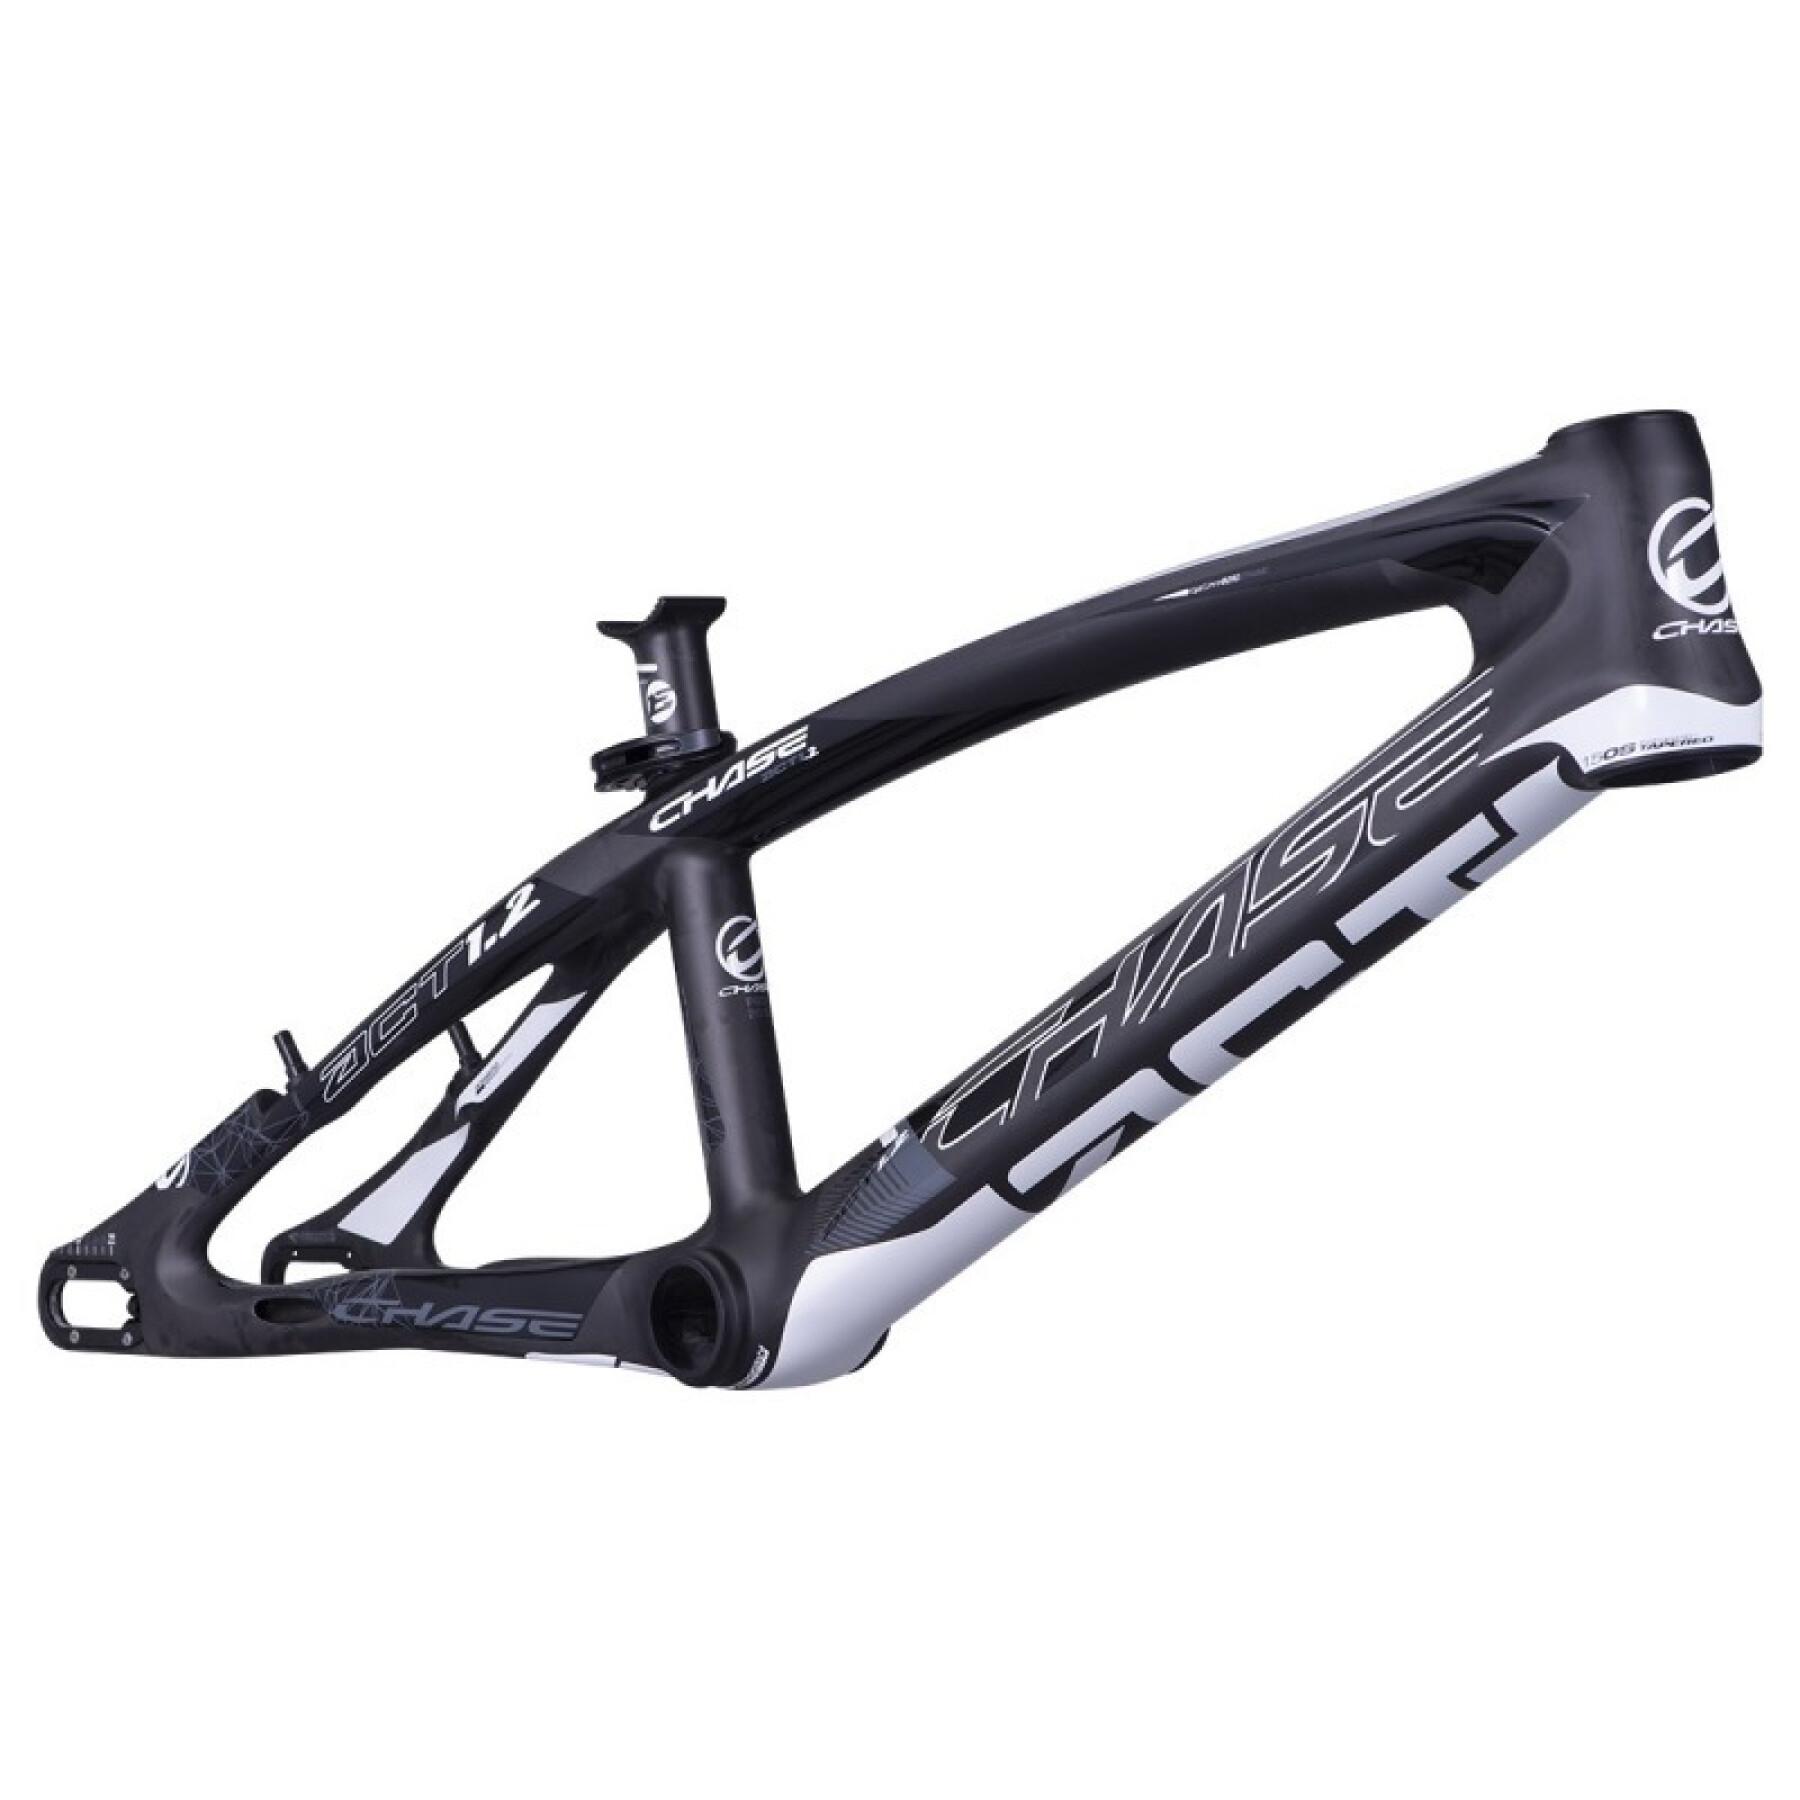 Fietsframe Chase Act1.2 21" OD 1-1/8"-1.5"